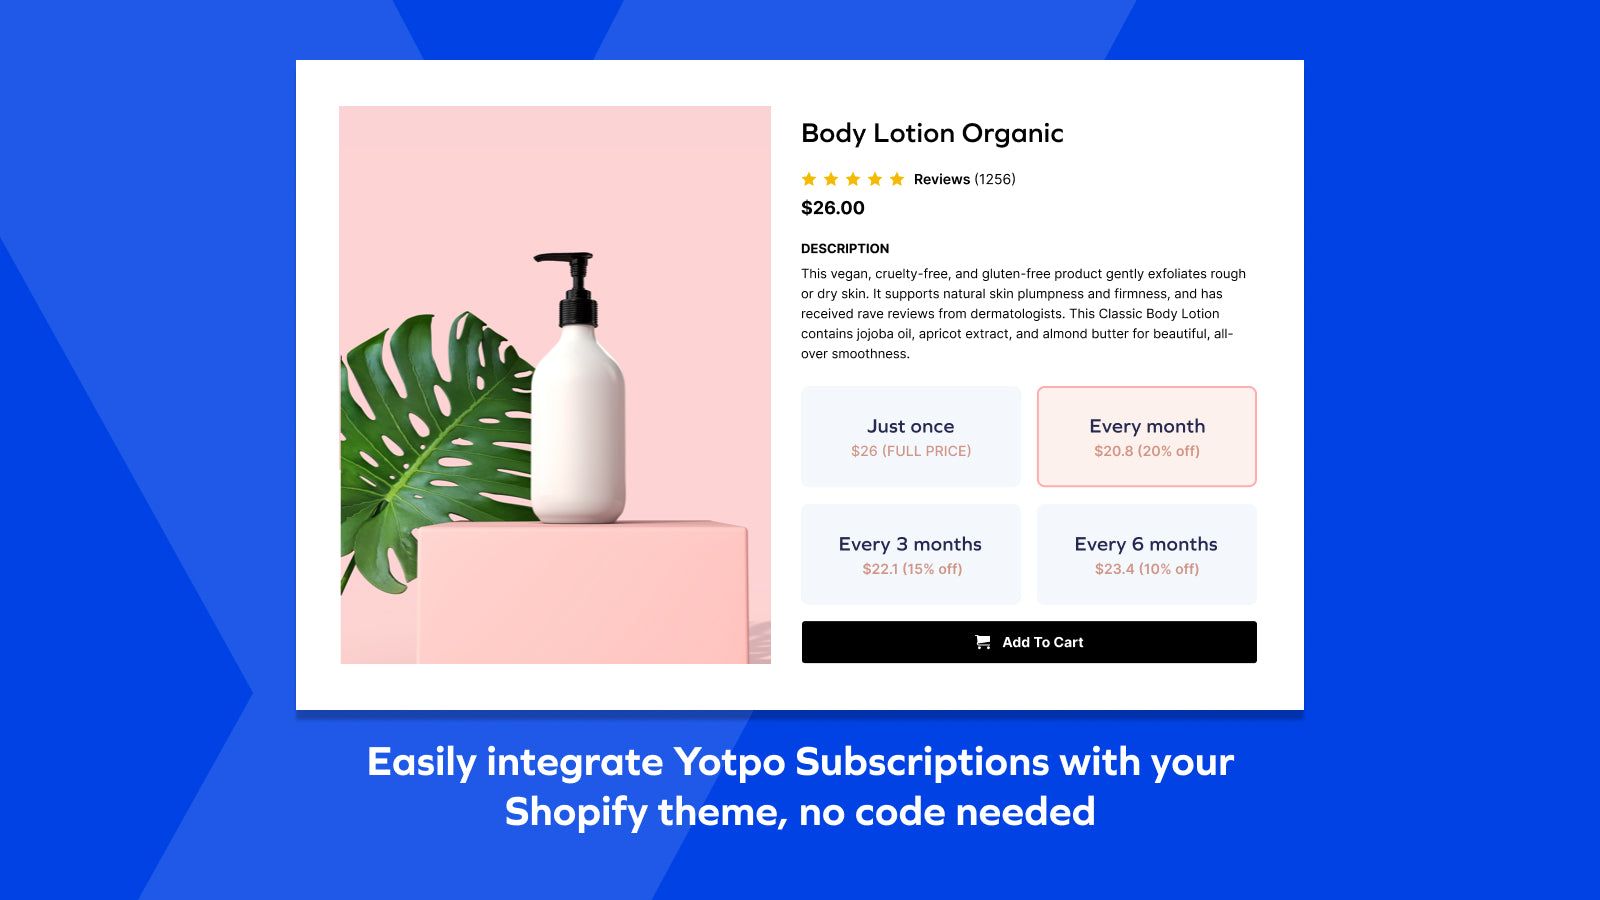 Full integration to Shopify theme